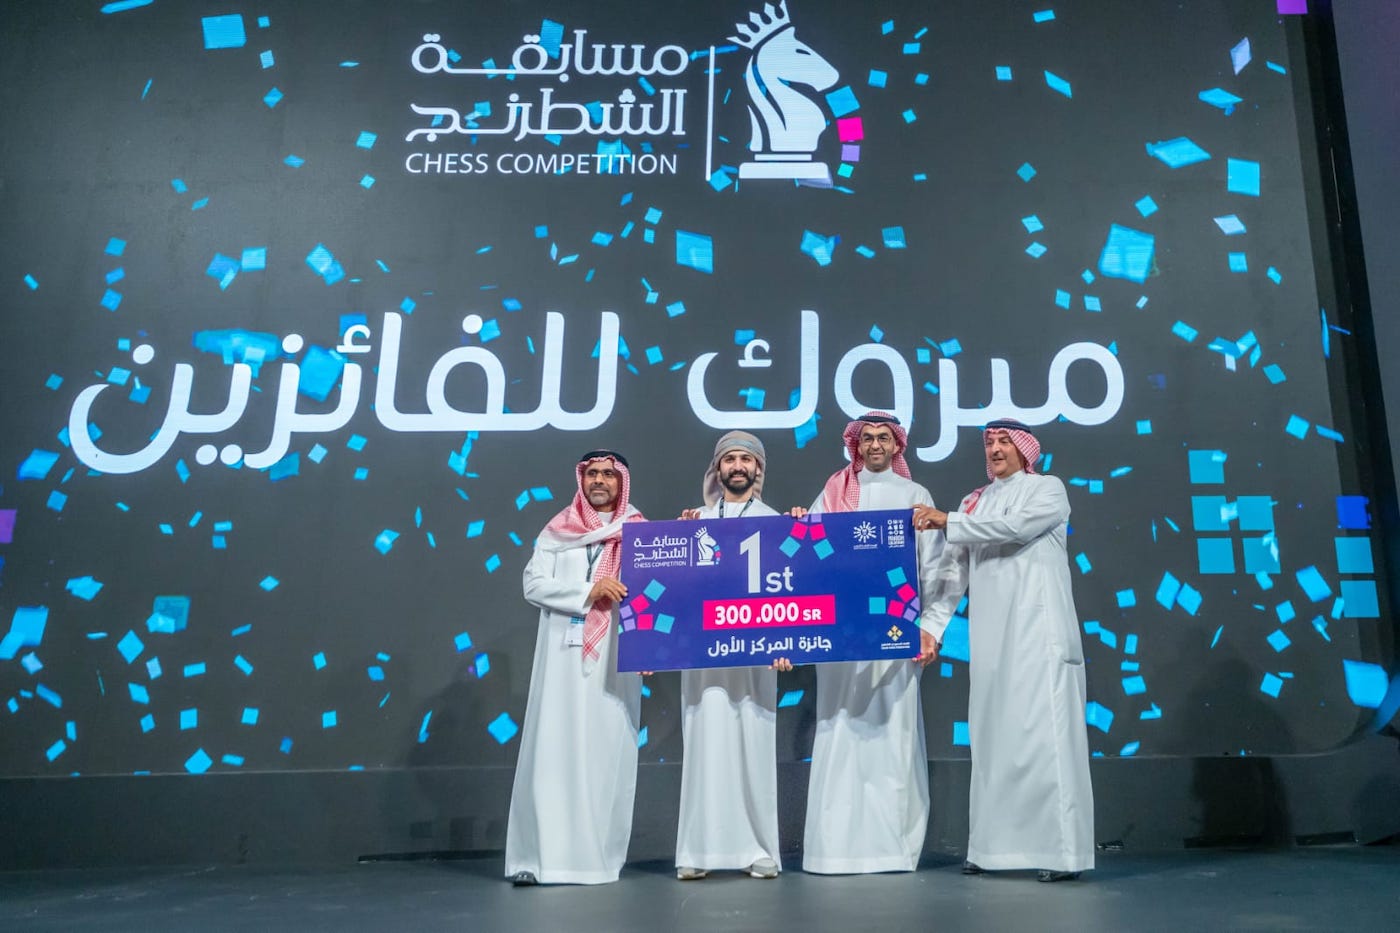 The UAE’s Salem Saleh (center) wins first place in the Riyadh Calendar Chess Championship. (Supplied)